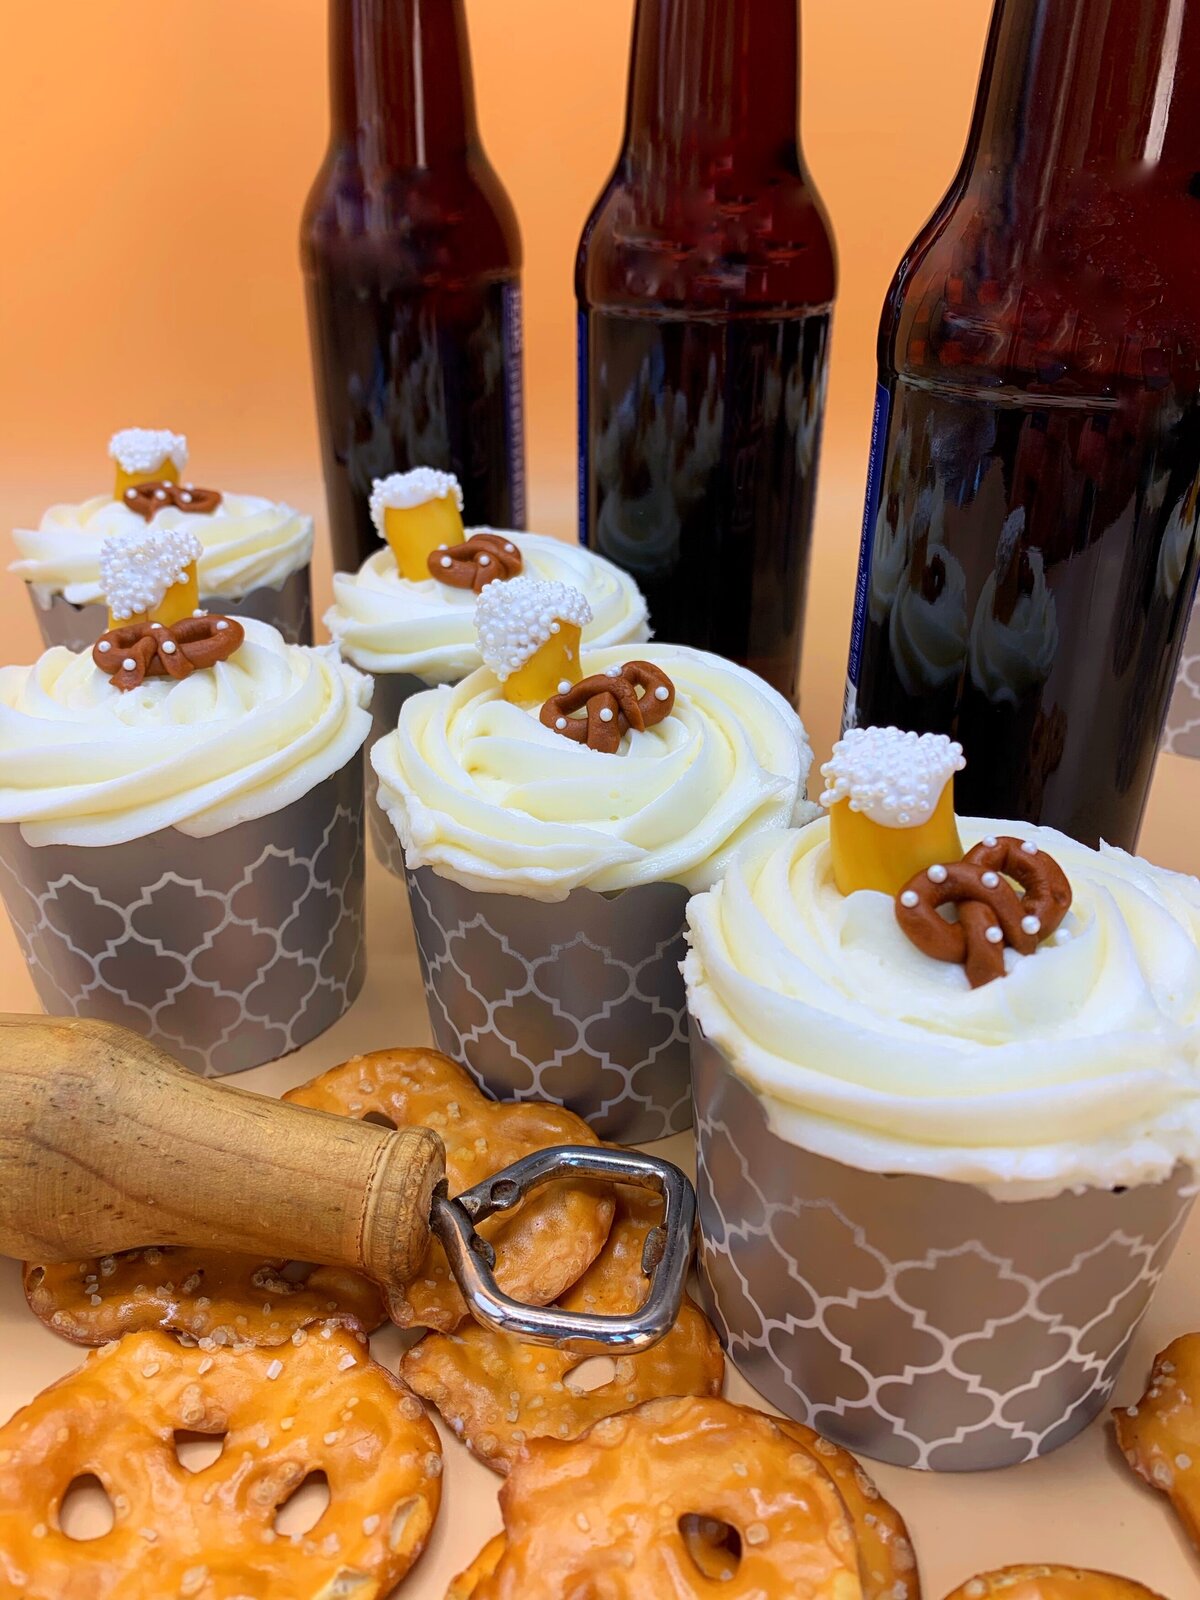 Cupcakes with chocolate beer mug and pretzel topping